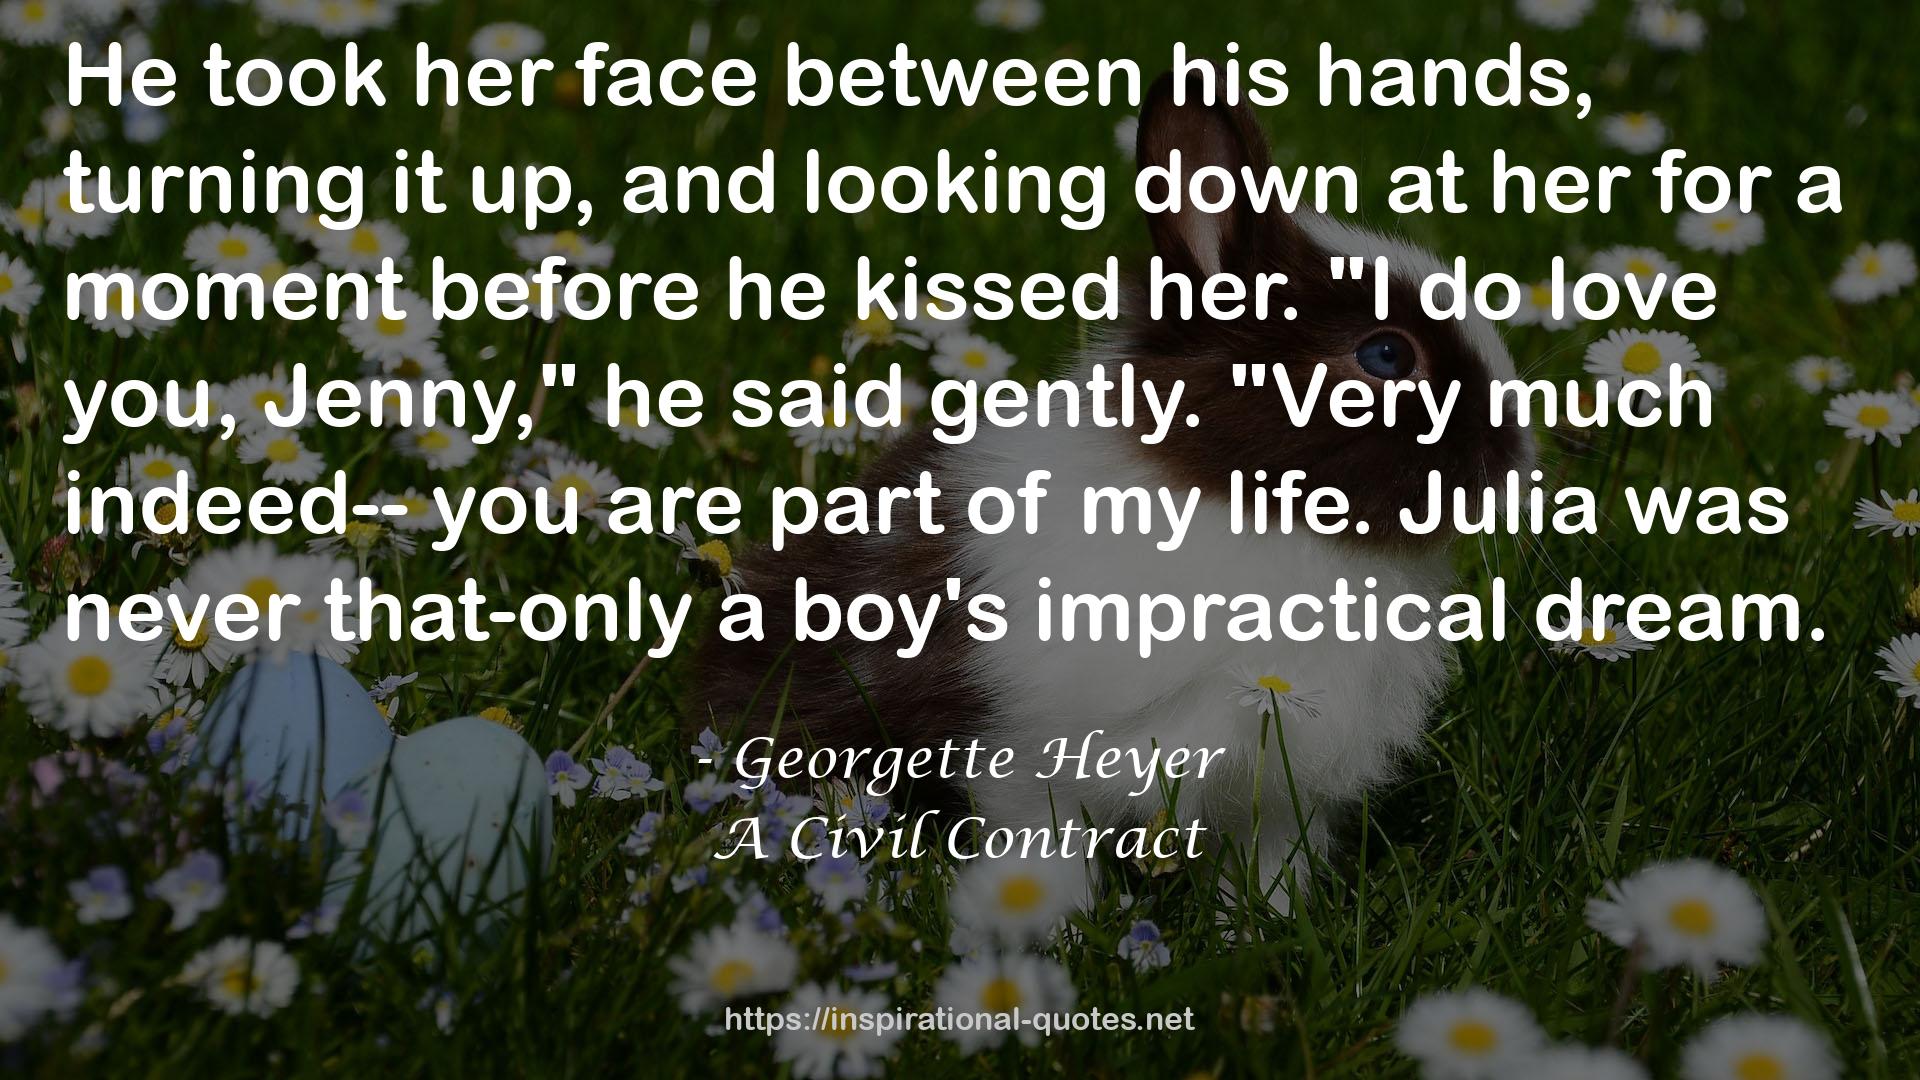 A Civil Contract QUOTES